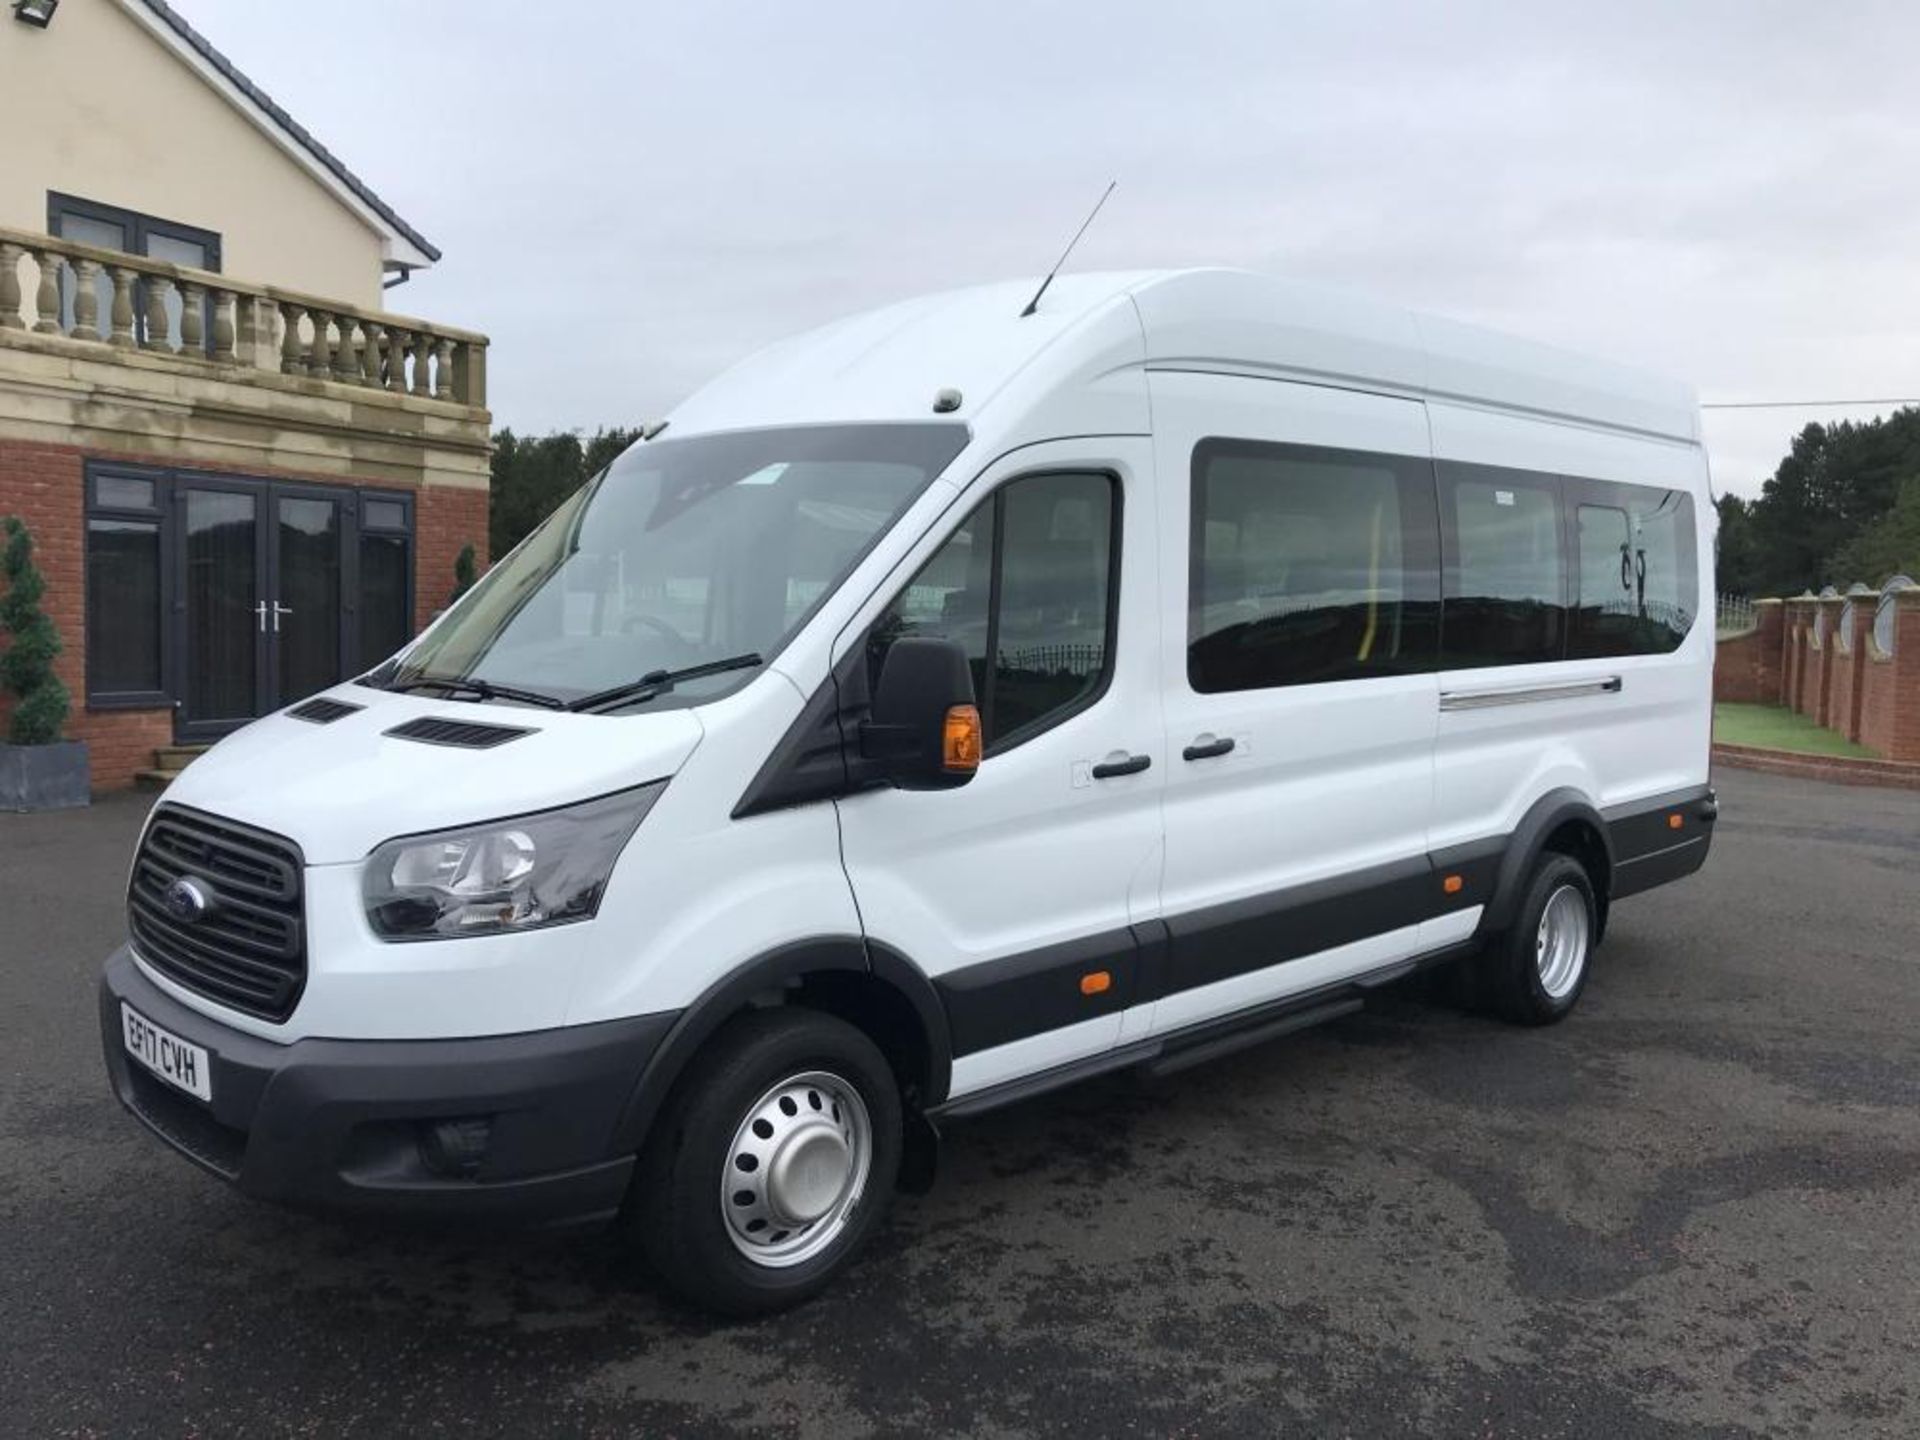 2017/17 REG FORD TRANSIT 460 ECONETIC TECH 2.2 DIESEL WHITE 17 SEAT MINIBUS, SHOWING 0 FORMER KEEPER - Image 2 of 17